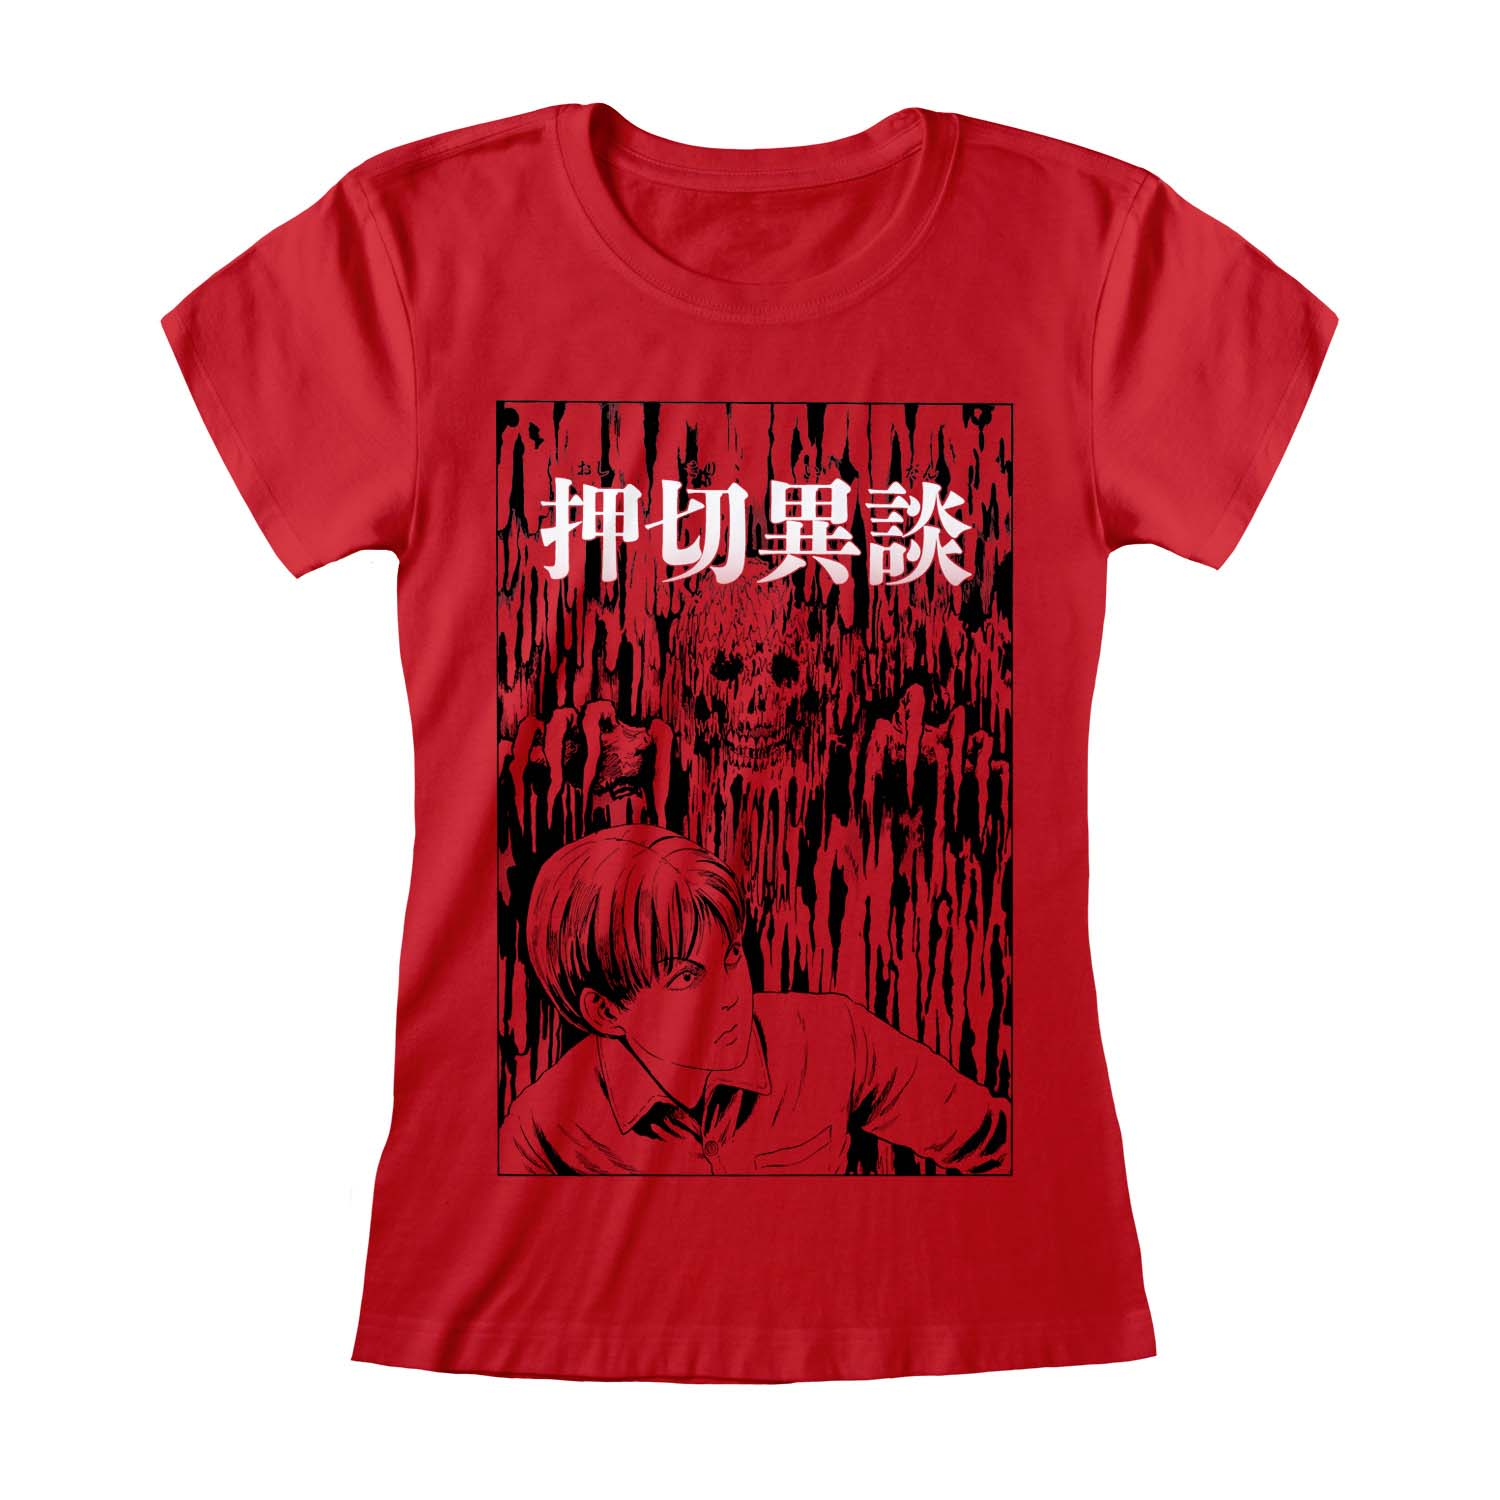 Junji-Ito Dripping Fitted T-Shirt